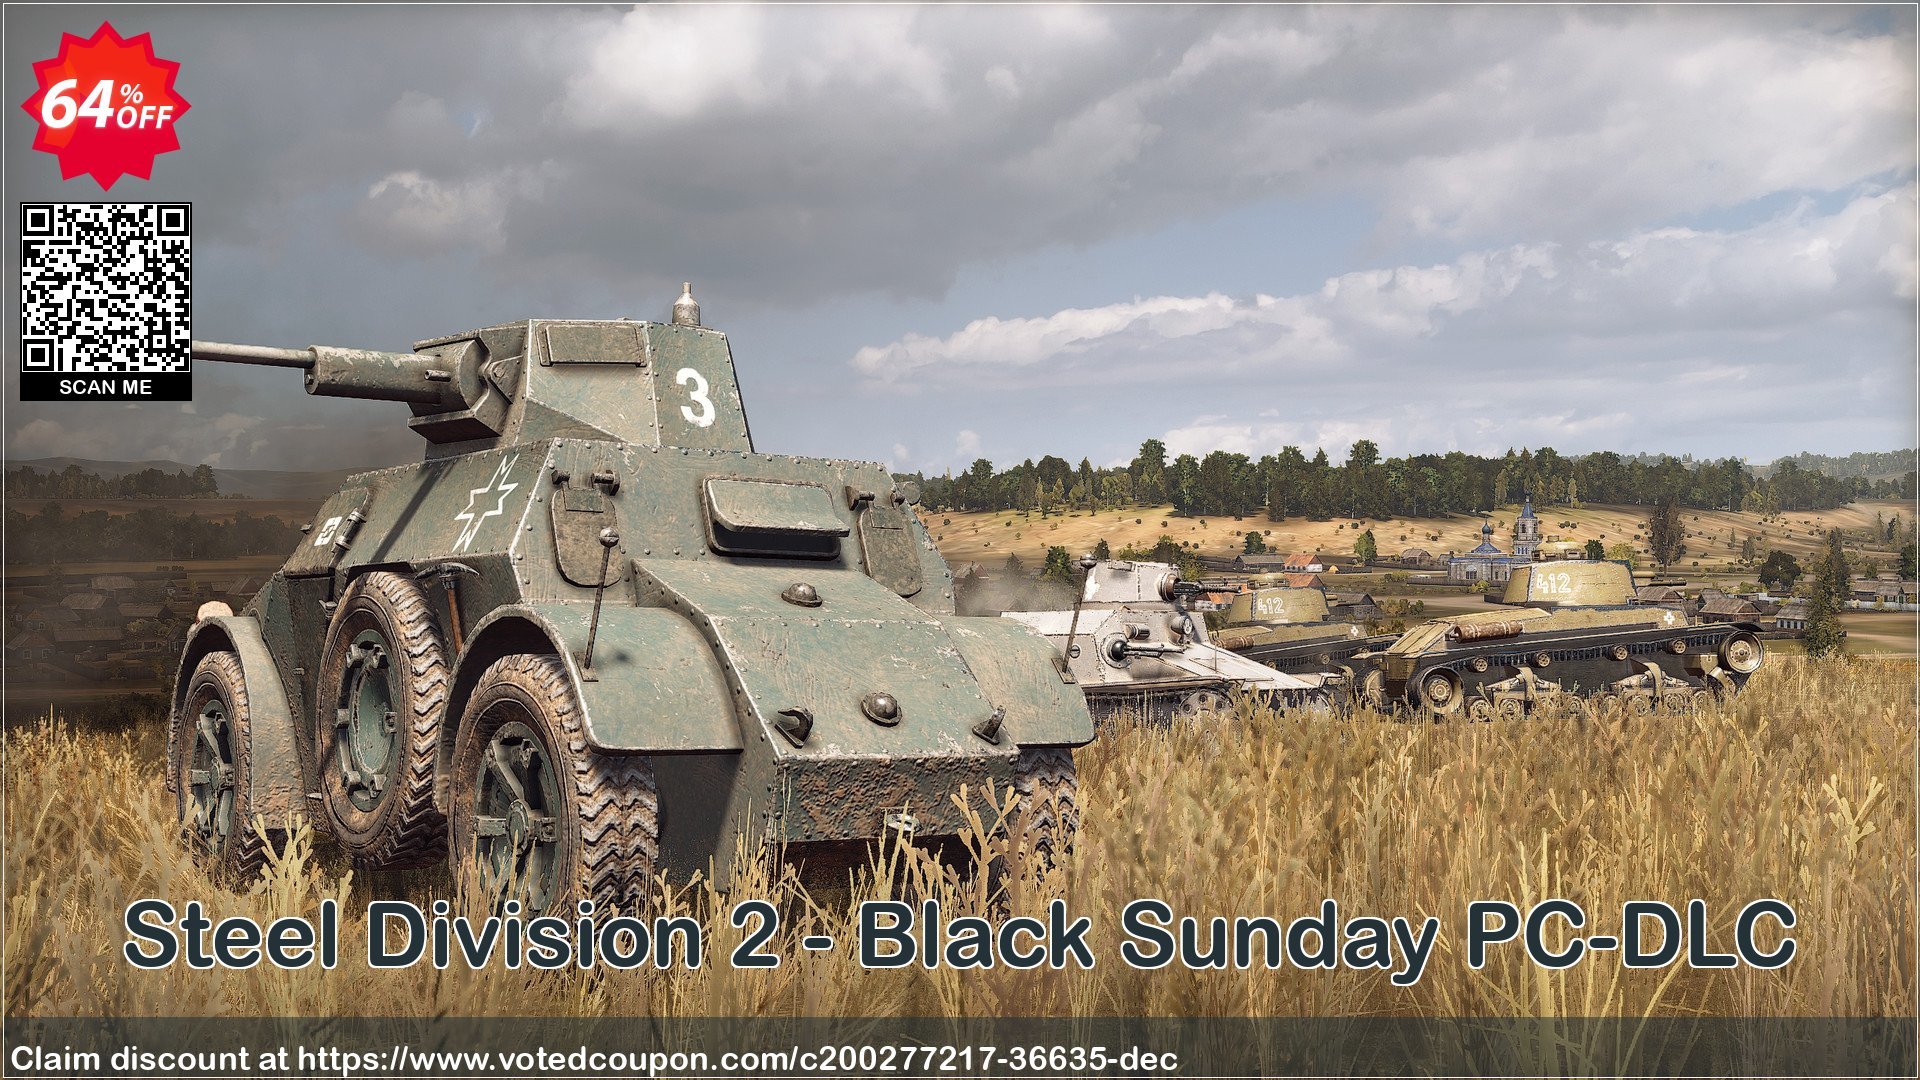 Steel Division 2 - Black Sunday PC-DLC Coupon Code Apr 2024, 64% OFF - VotedCoupon